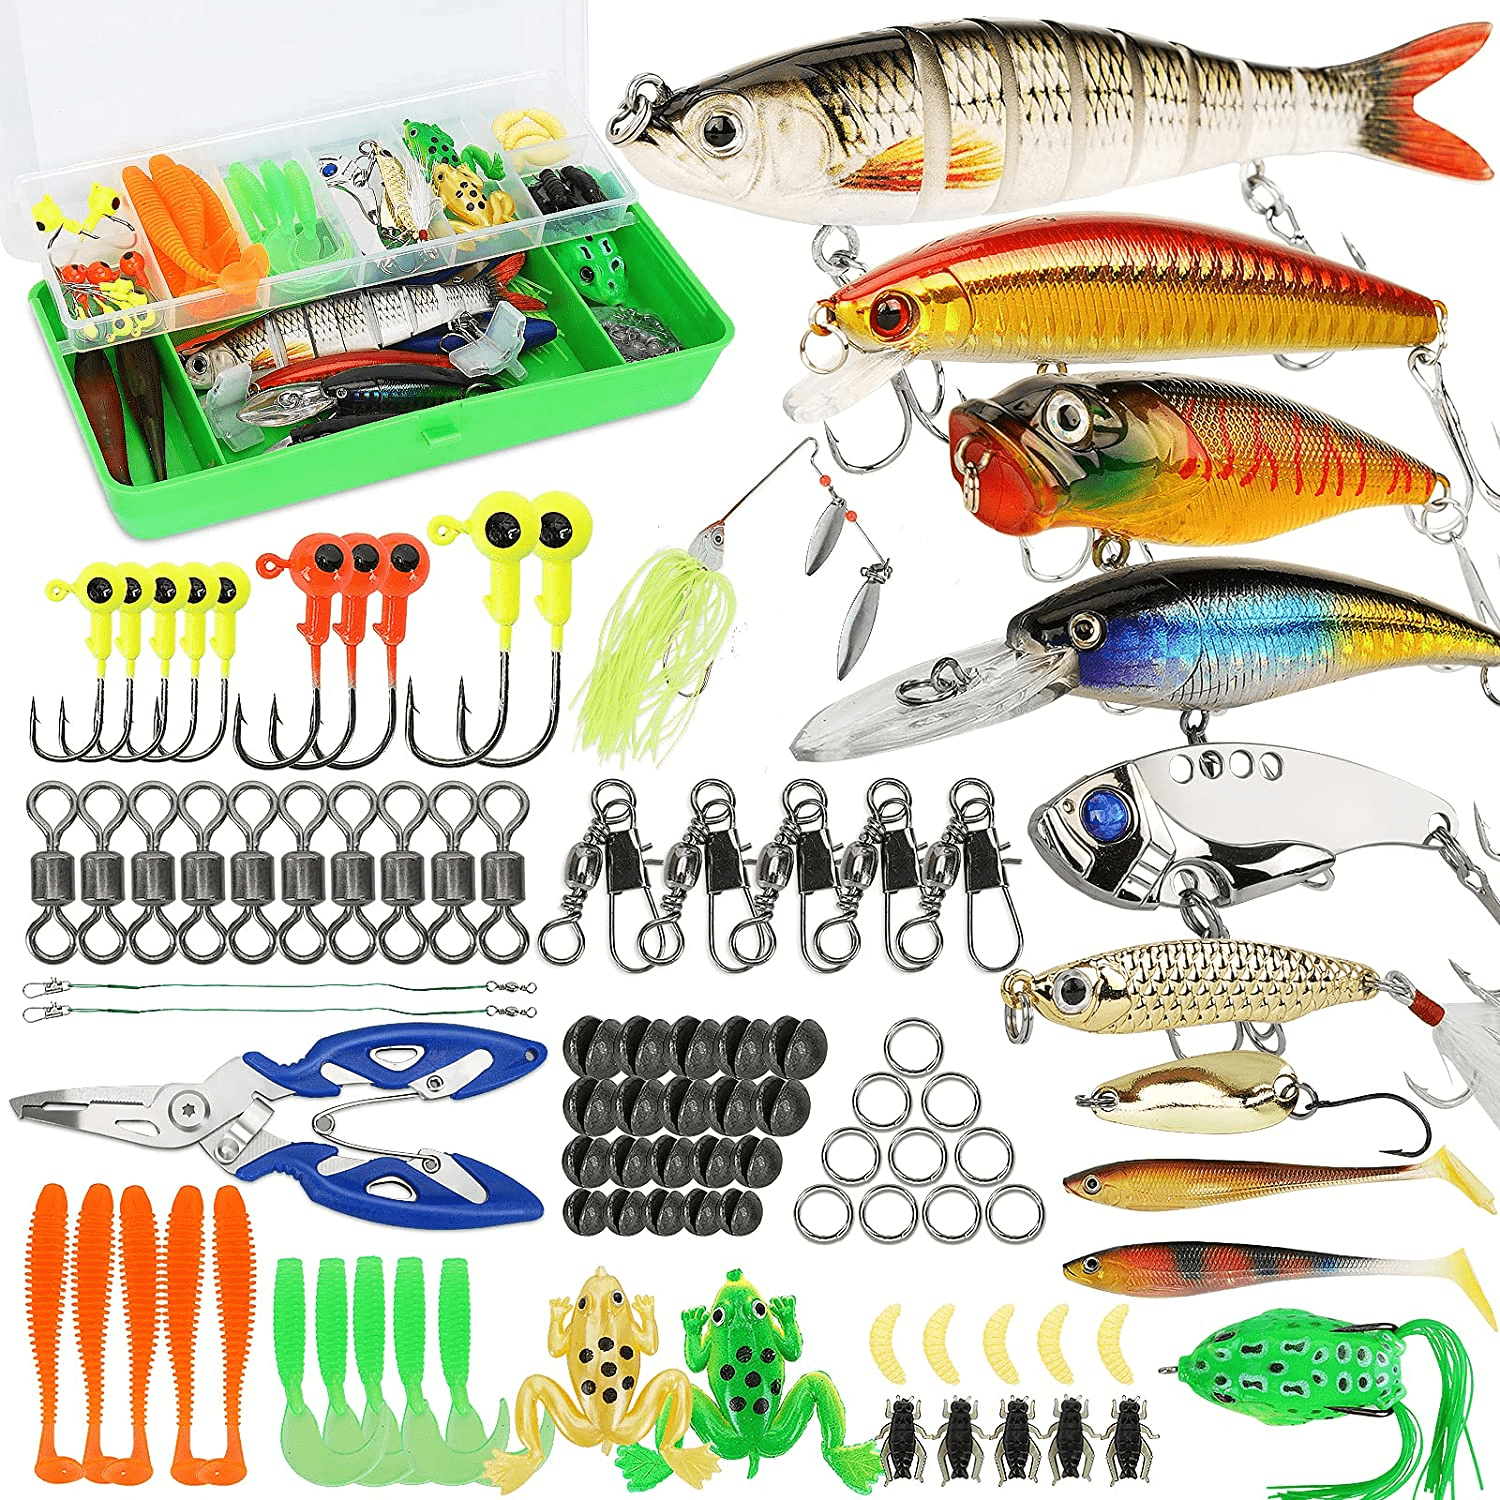 Fishing Lures Tackle Box Bass Fishing Including Animated Lure,Crankbaits,Spinnerbaits,Soft Plastic Worms, Jigs,Topwater Lures,Hooks,Saltwater & Freshwater Fishing Kit for Bass,Trout, Salmon Fishing.